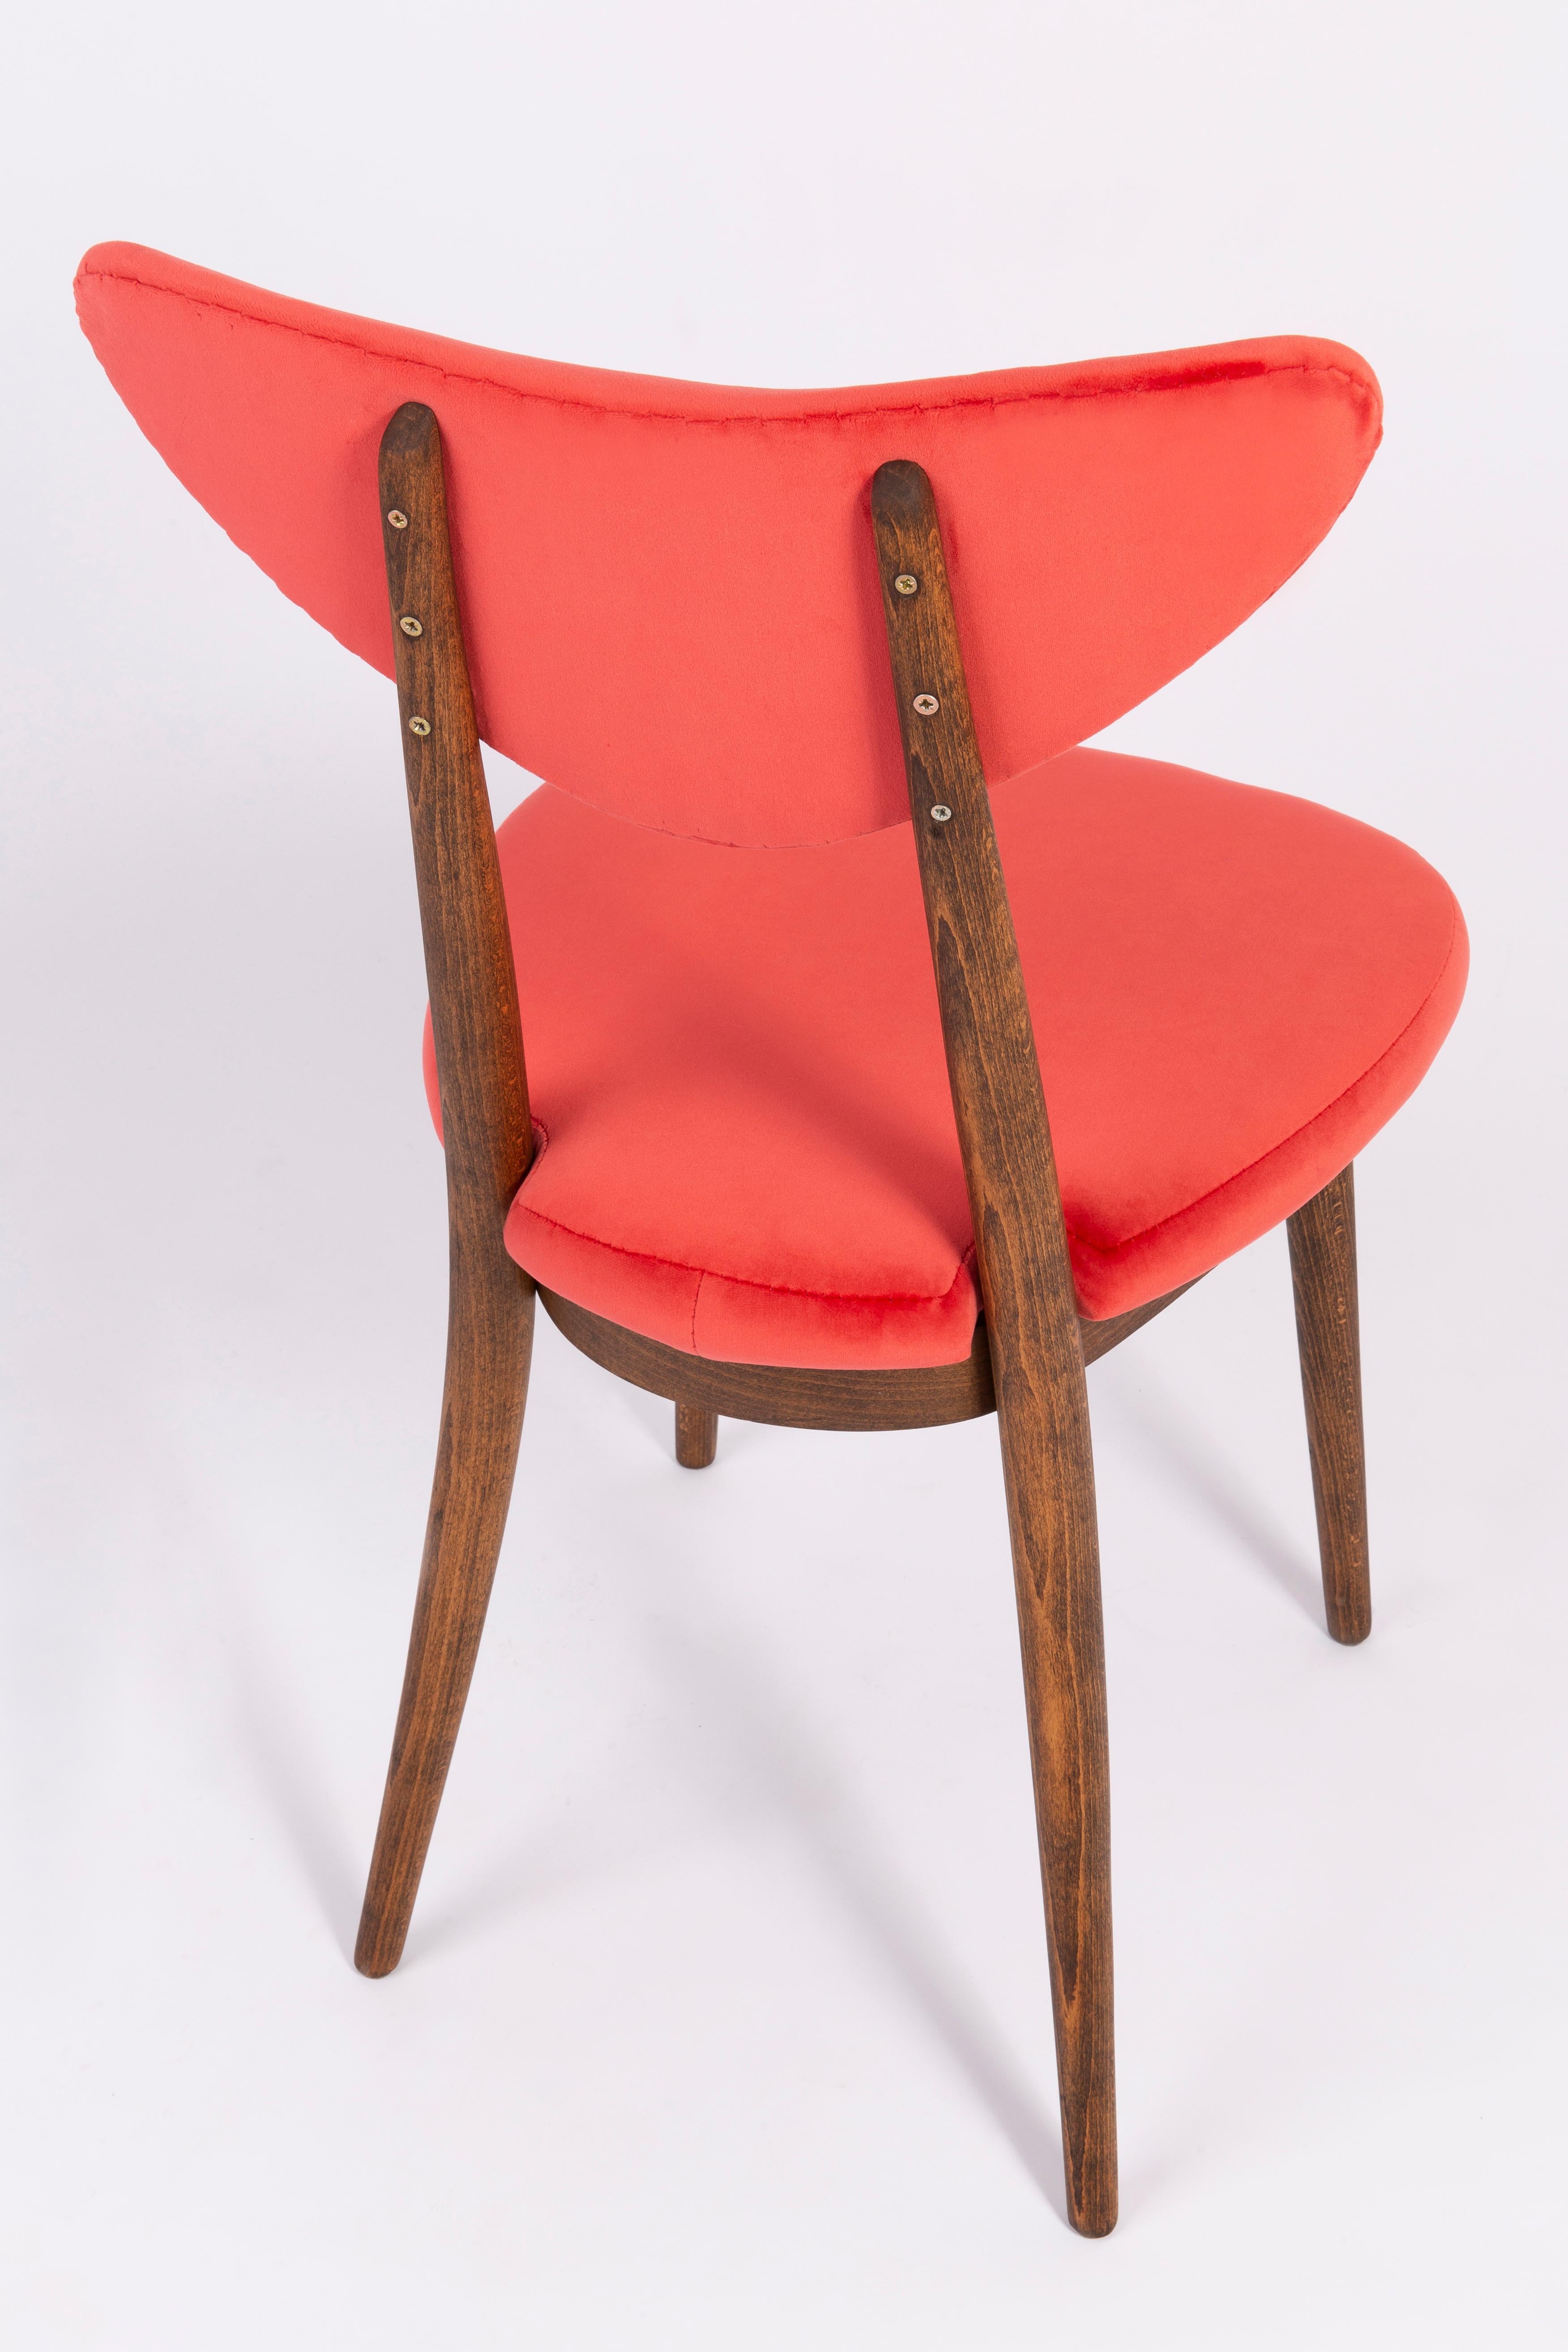 Set of Four Red Heart Chairs, Poland, 1960s For Sale 3